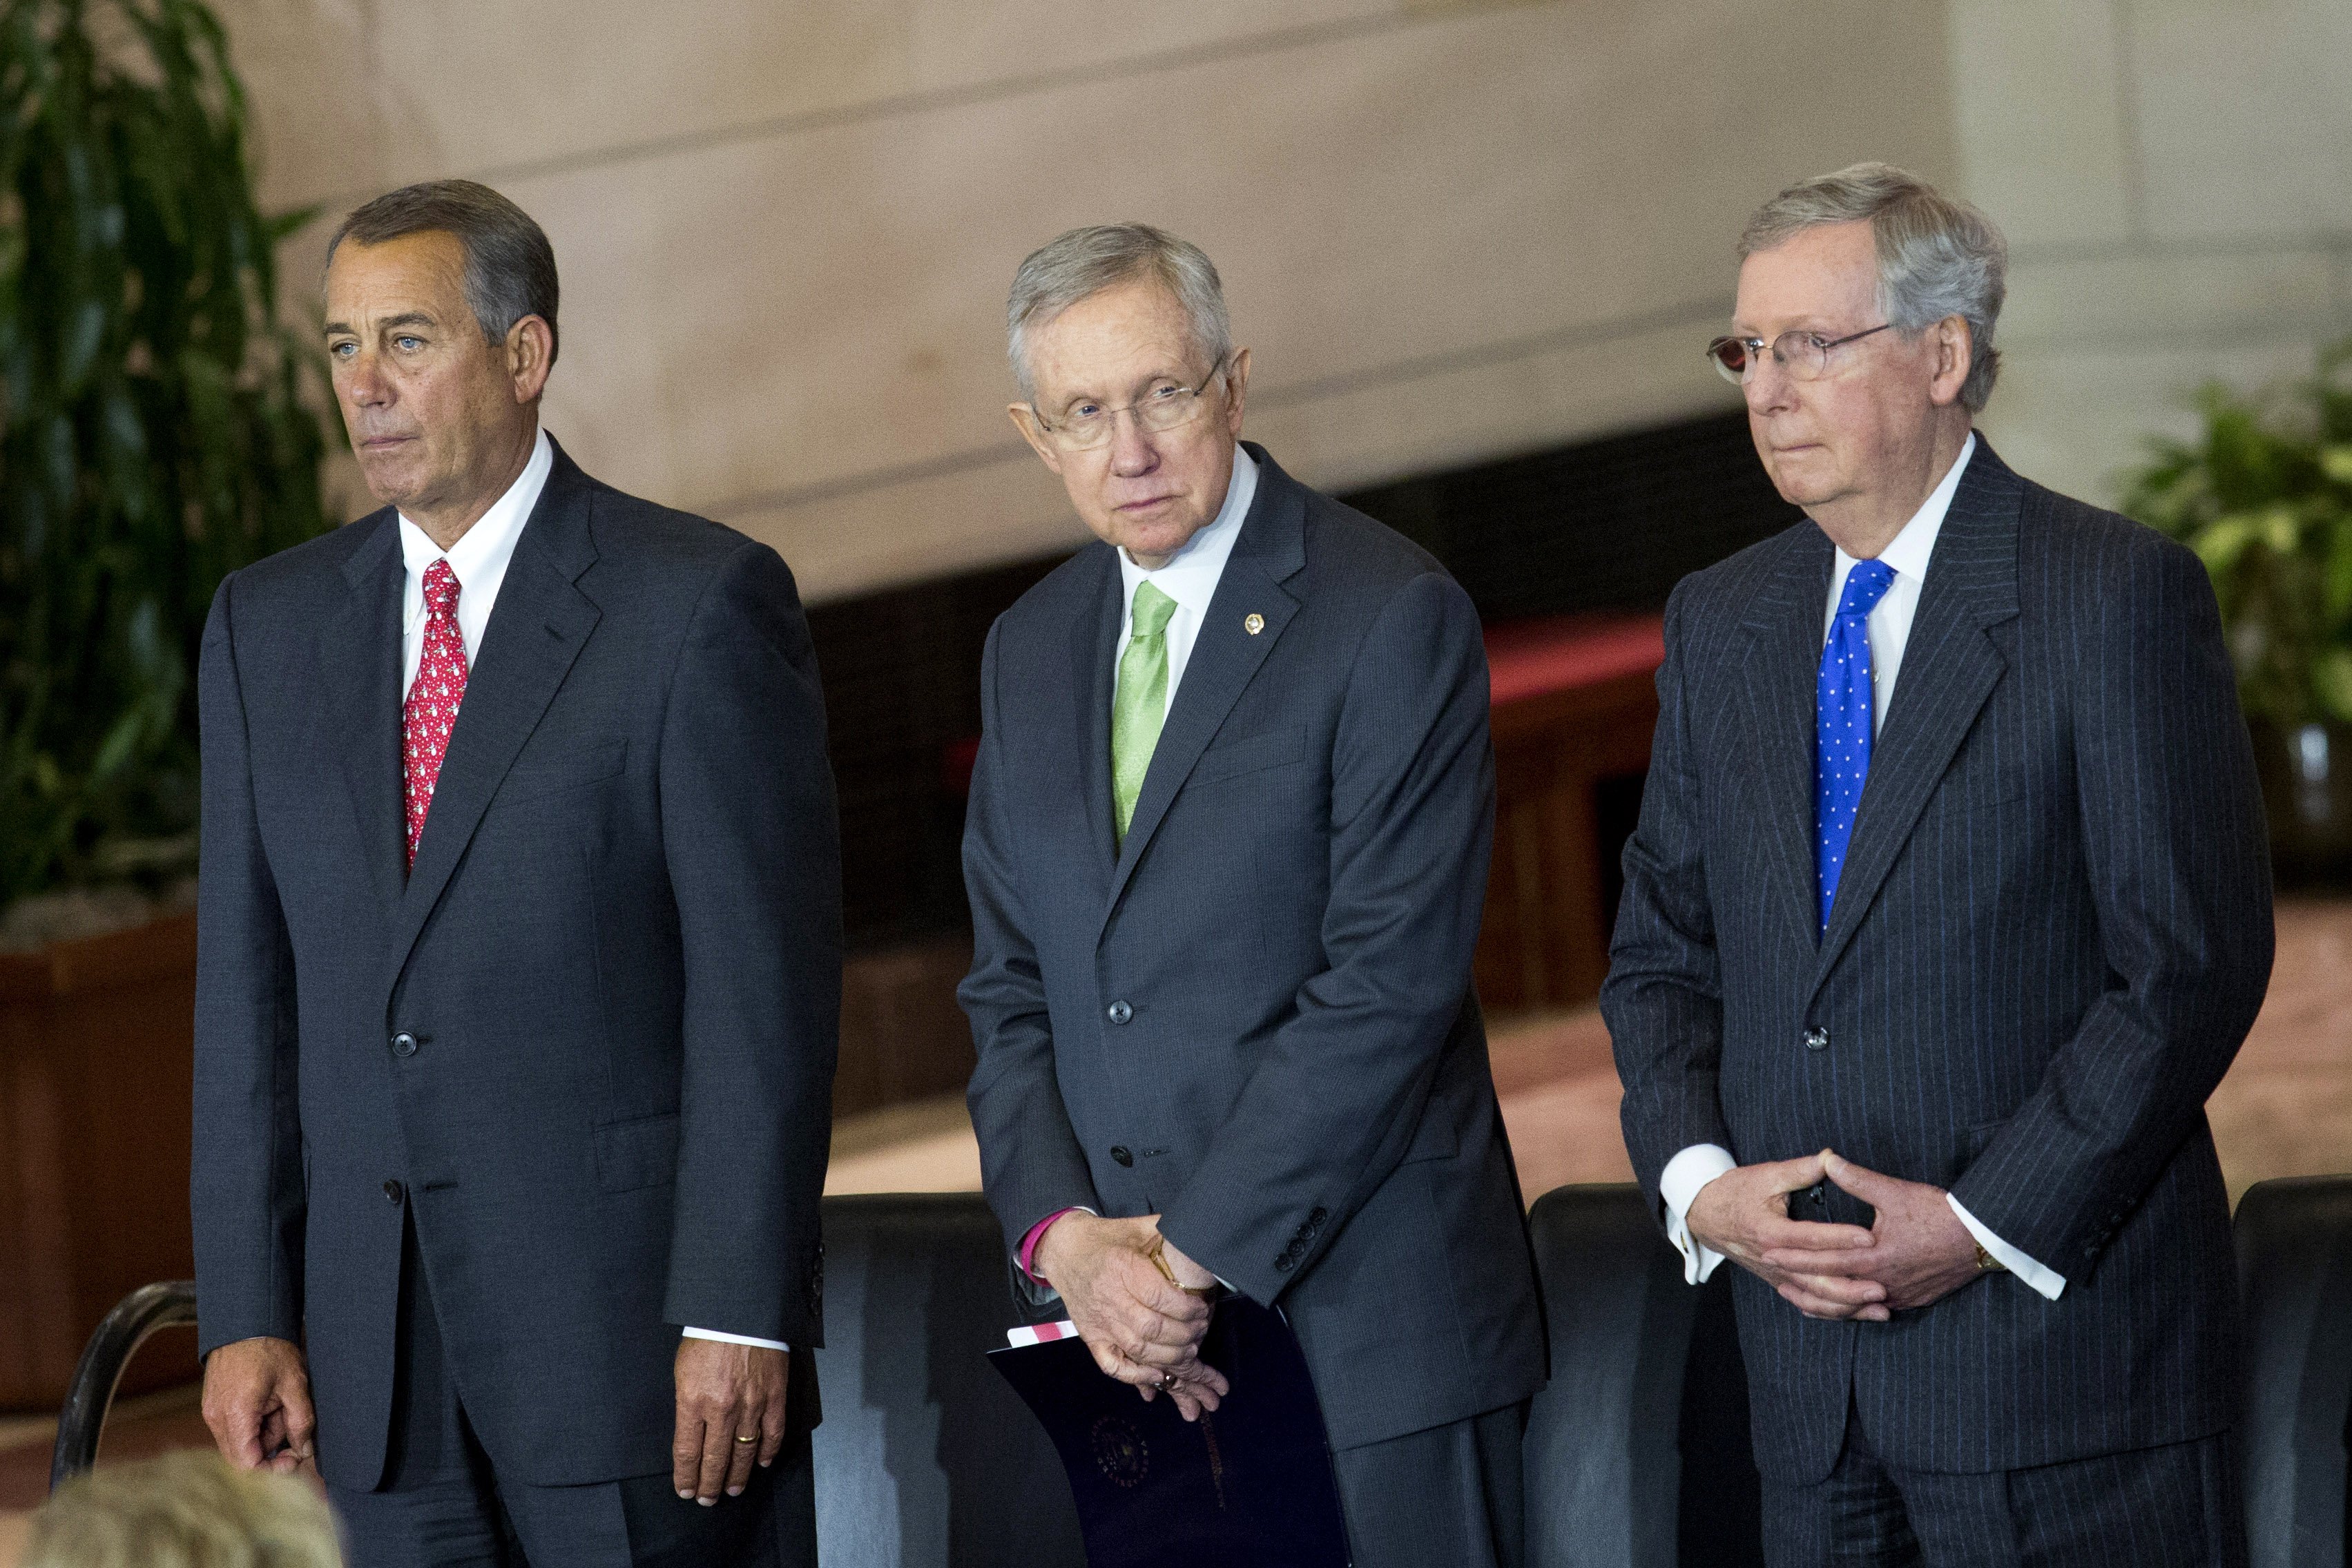 From Left: Speaker of the House John Boehner, Senate Majority Leader Harry Reid and Senate Minority Leader Mitch McConnell gather onstage prior to the start of a Congressional Gold Medal Ceremony for World War II era Civil Air Patrol members on Dec. 10, 2014 in Washington D.C. (Drew Angerer—Getty Images)